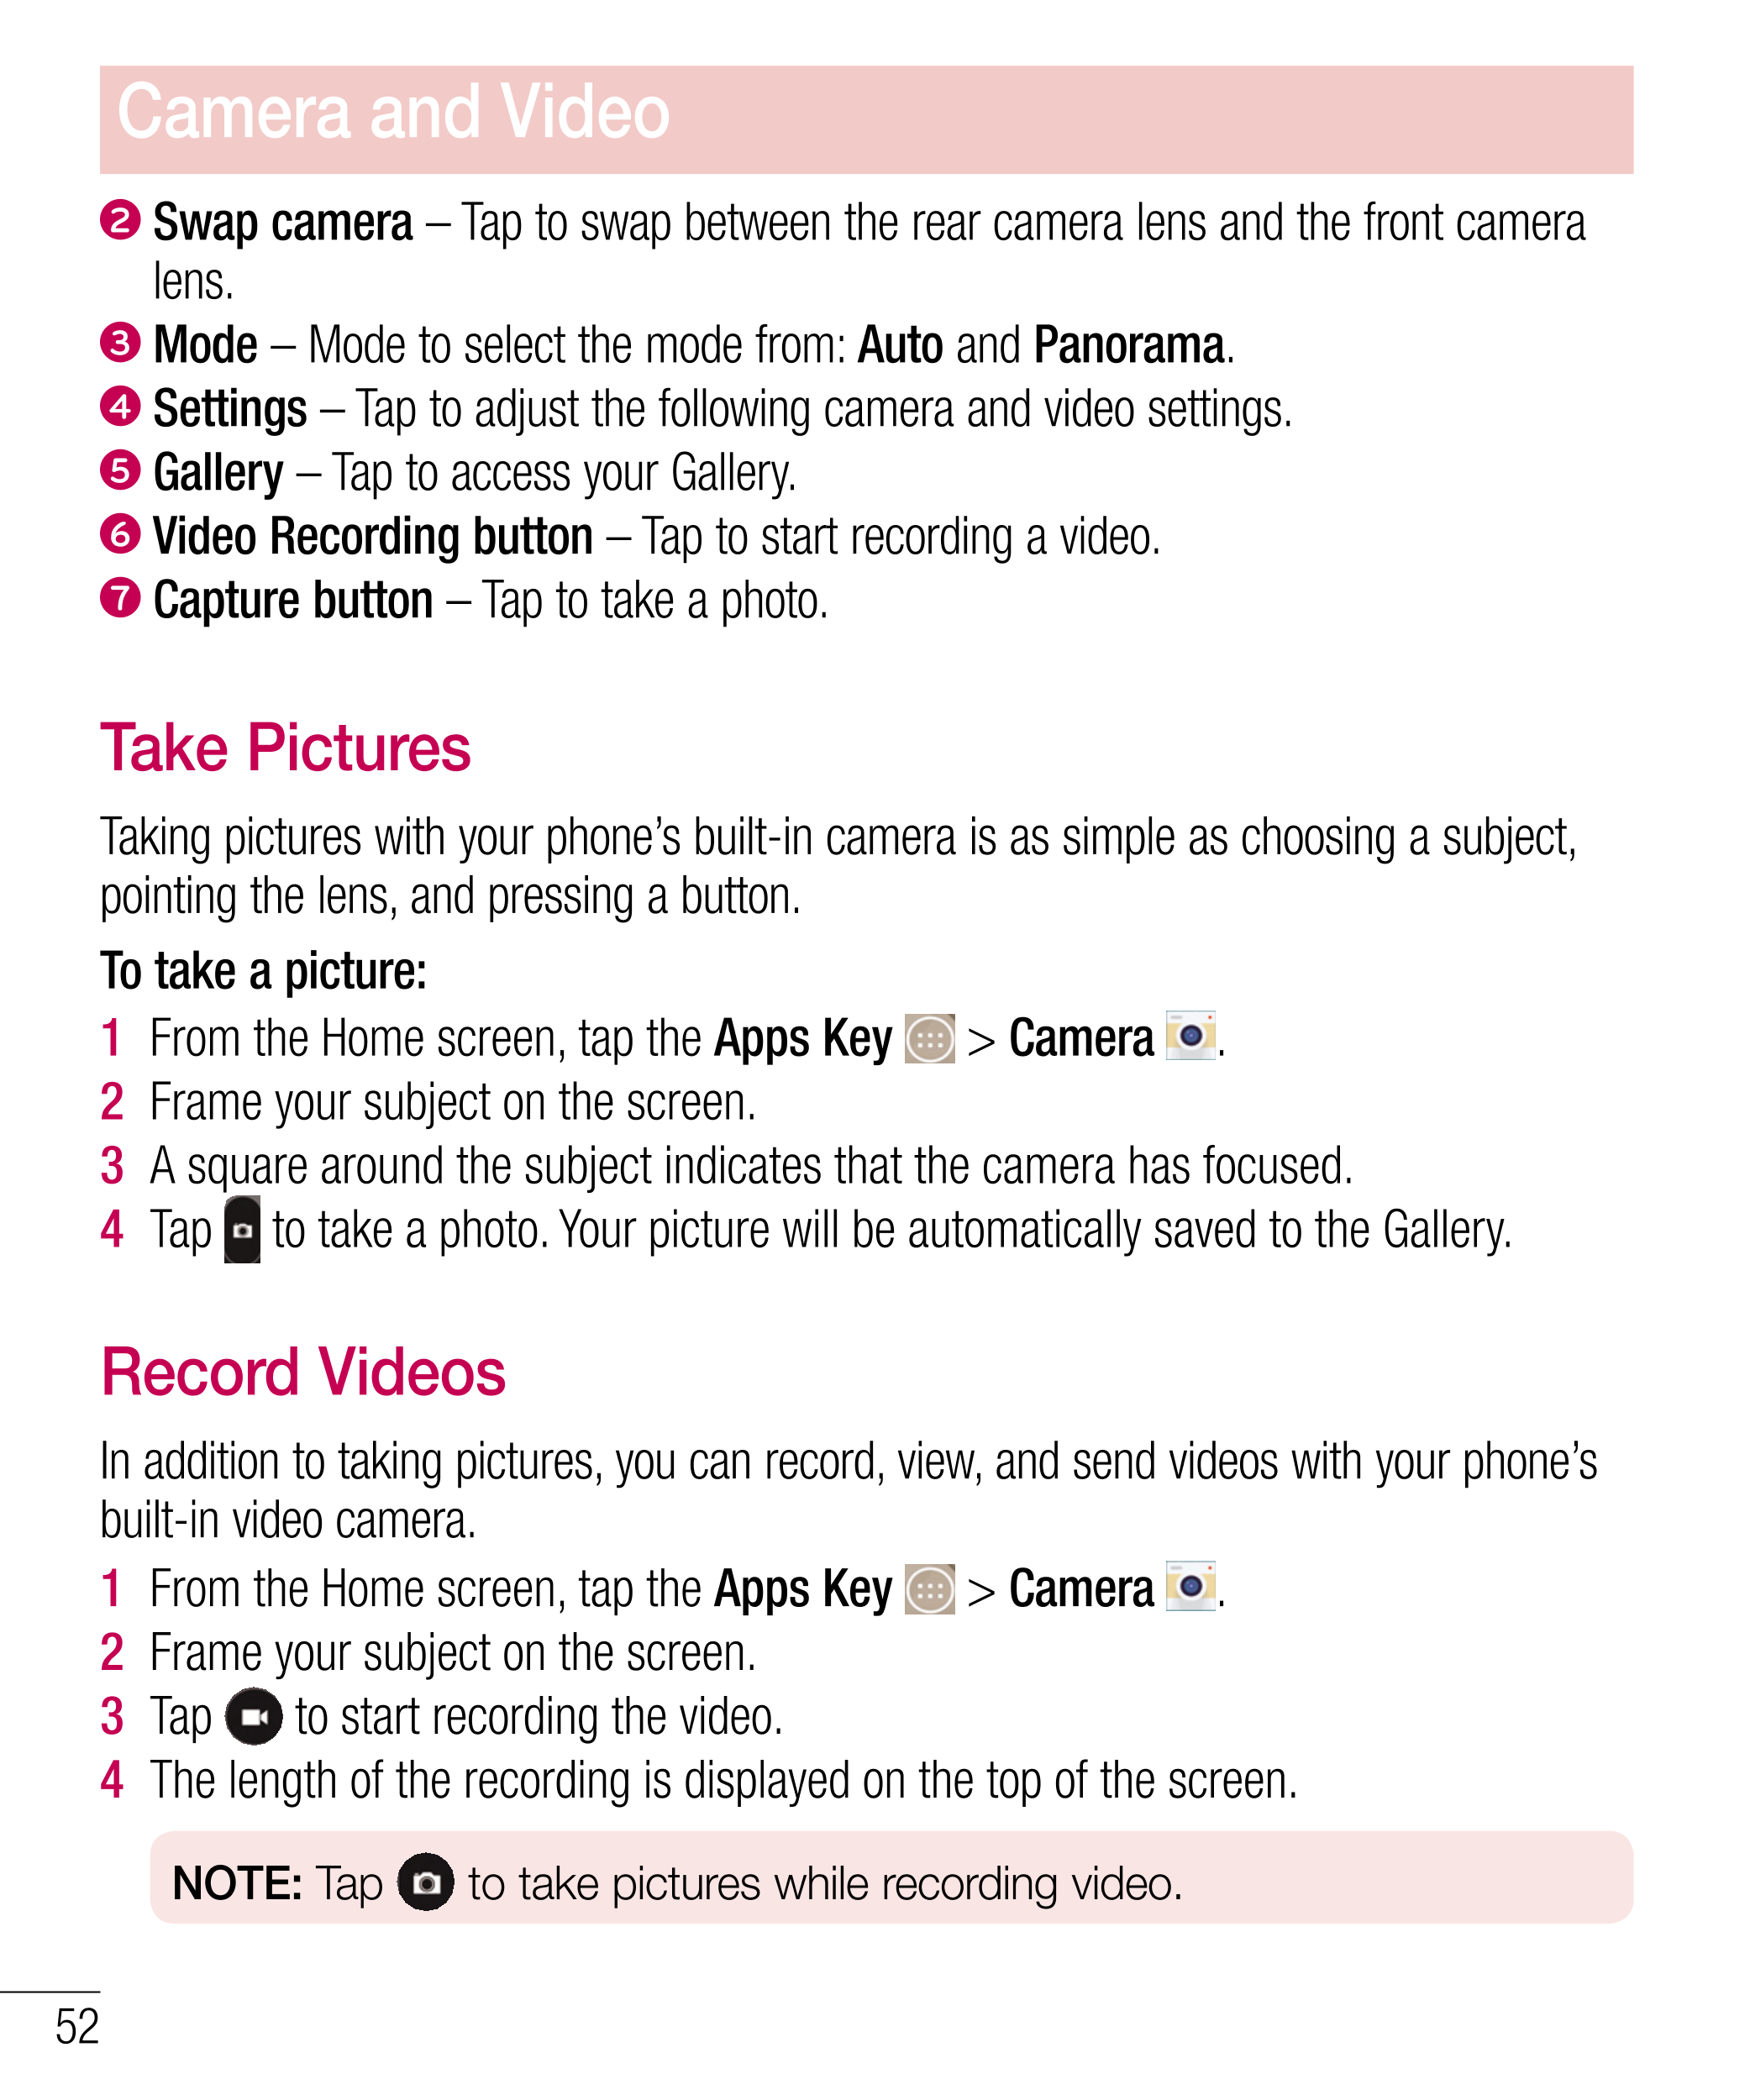 Camera and Video
2    Swap camera – Tap to swap between the rear camera lens and the front camera 
lens.
3    Mode – Mode to sel